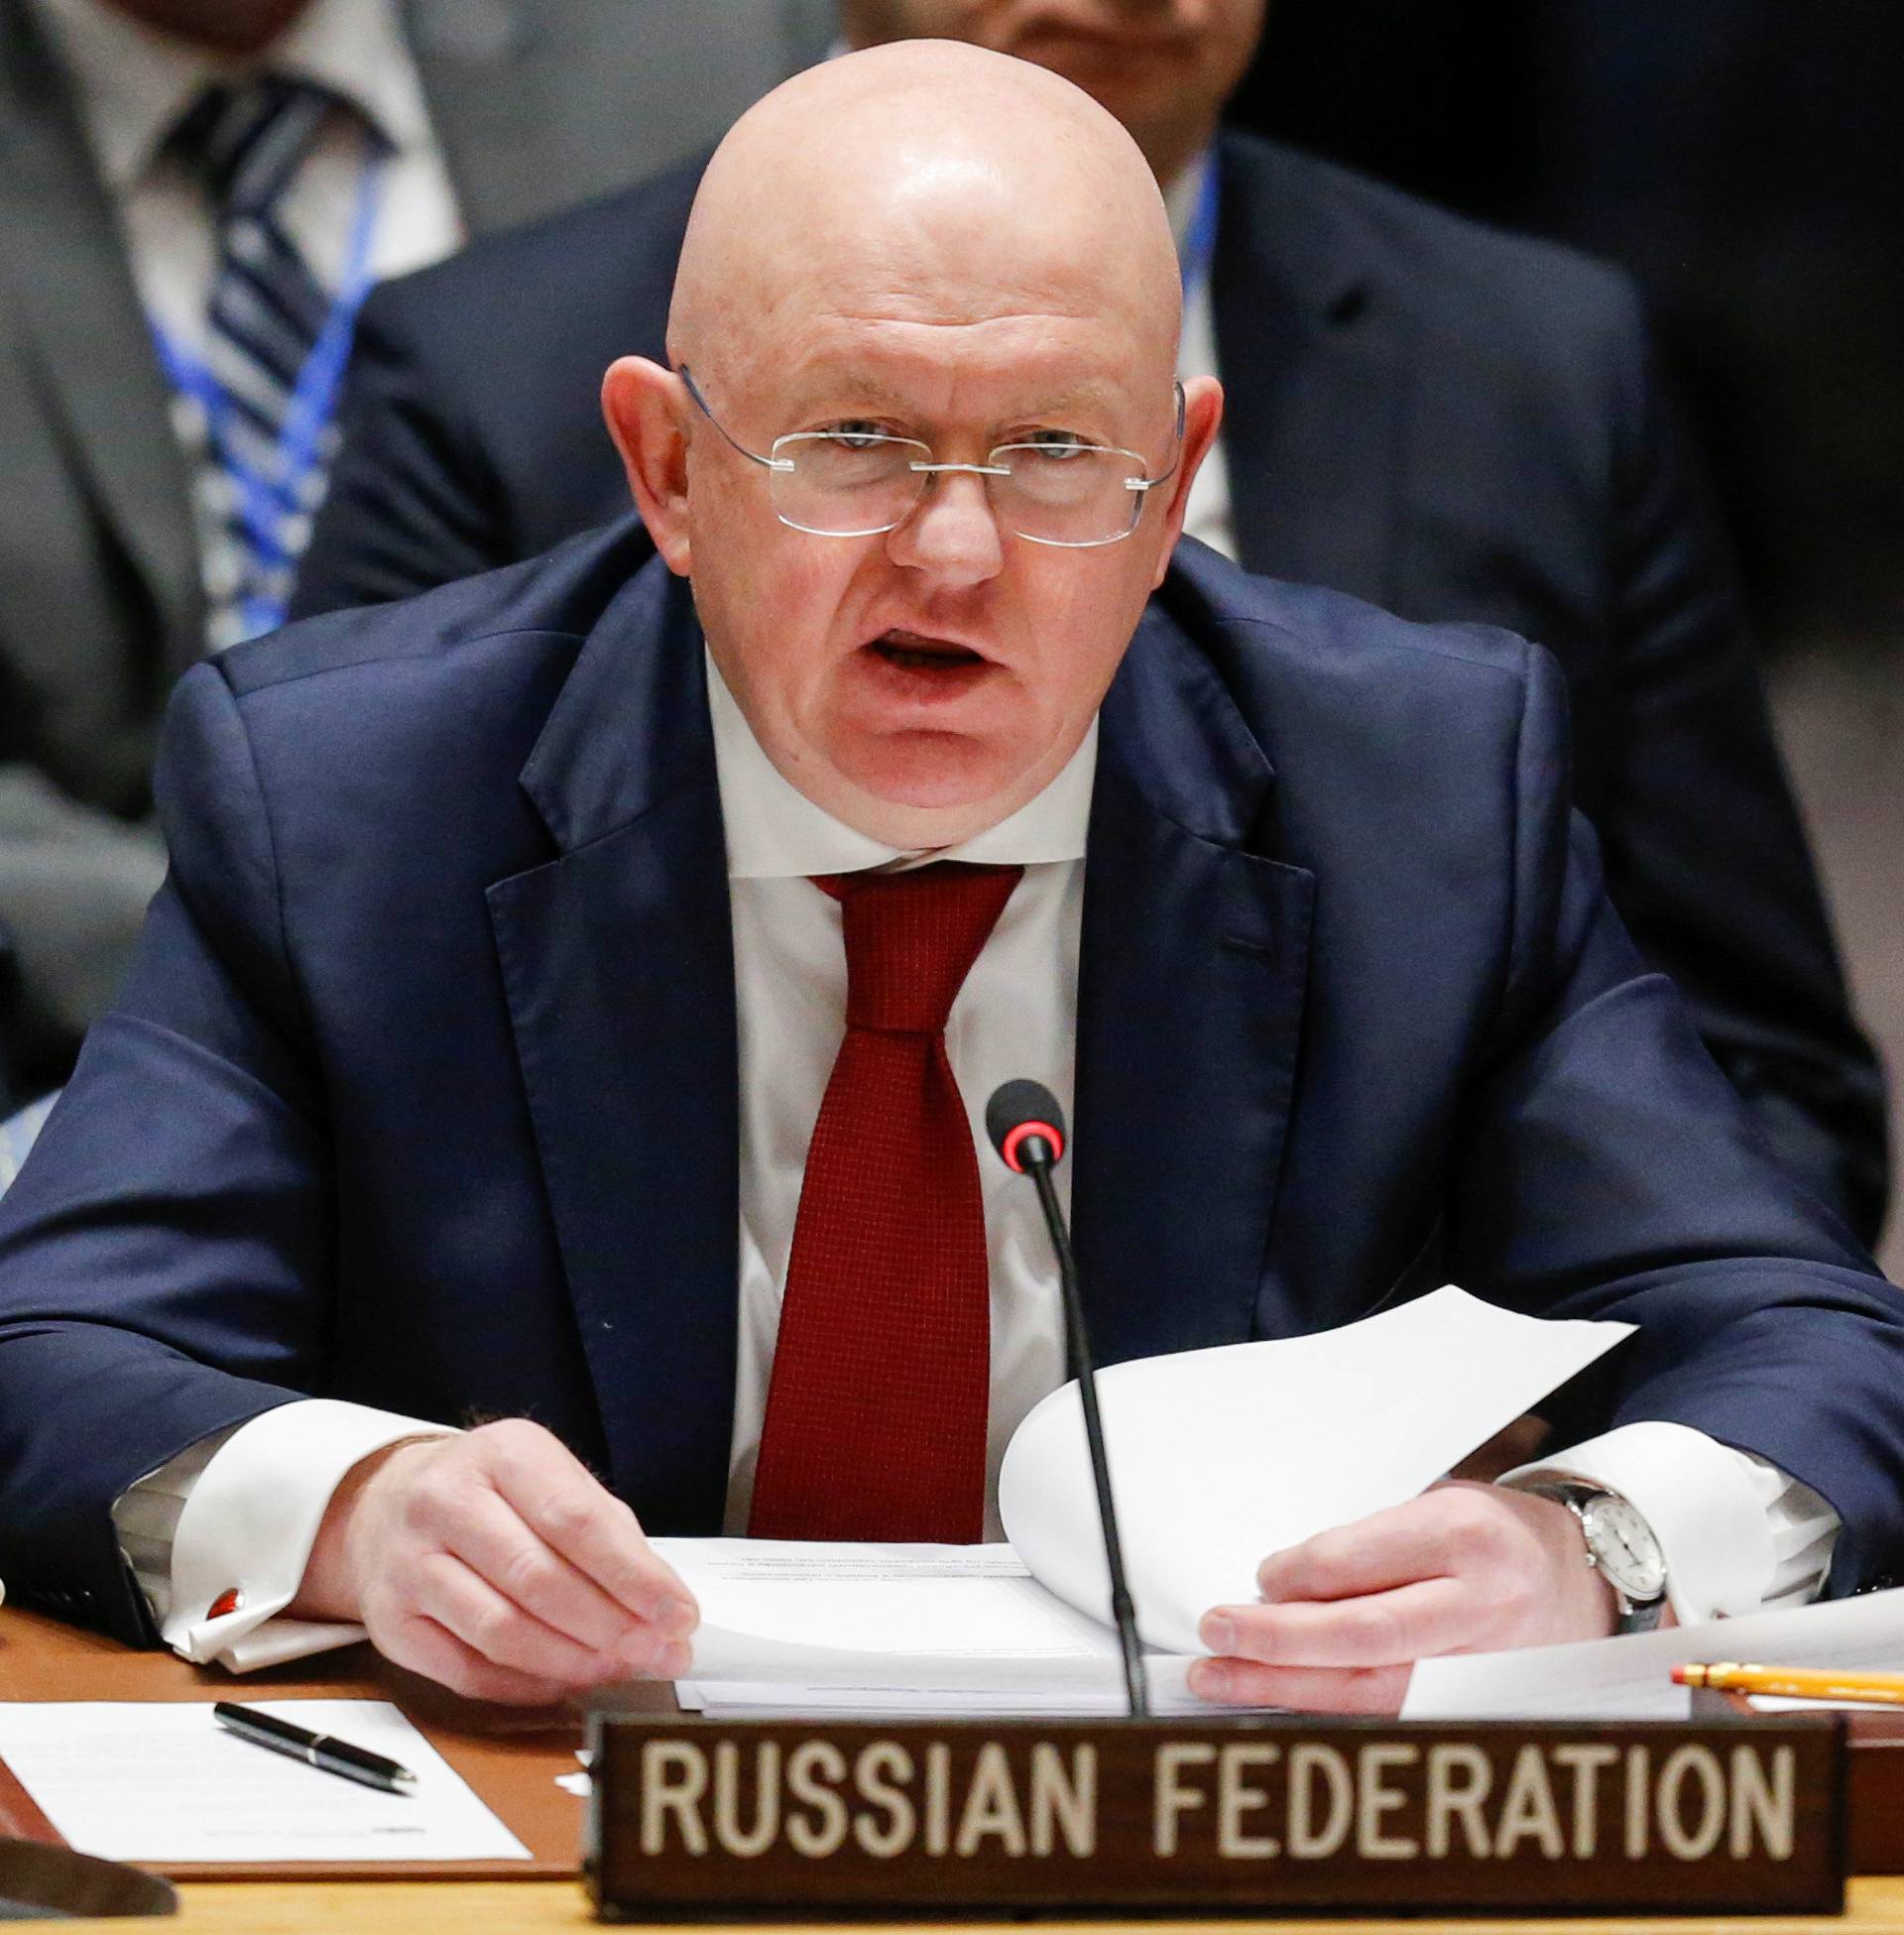 Russian Ambassador to the United Nations Nebenzya speaks during the emergency United Nations Security Council meeting on Syria at the U.N. headquarters in New York